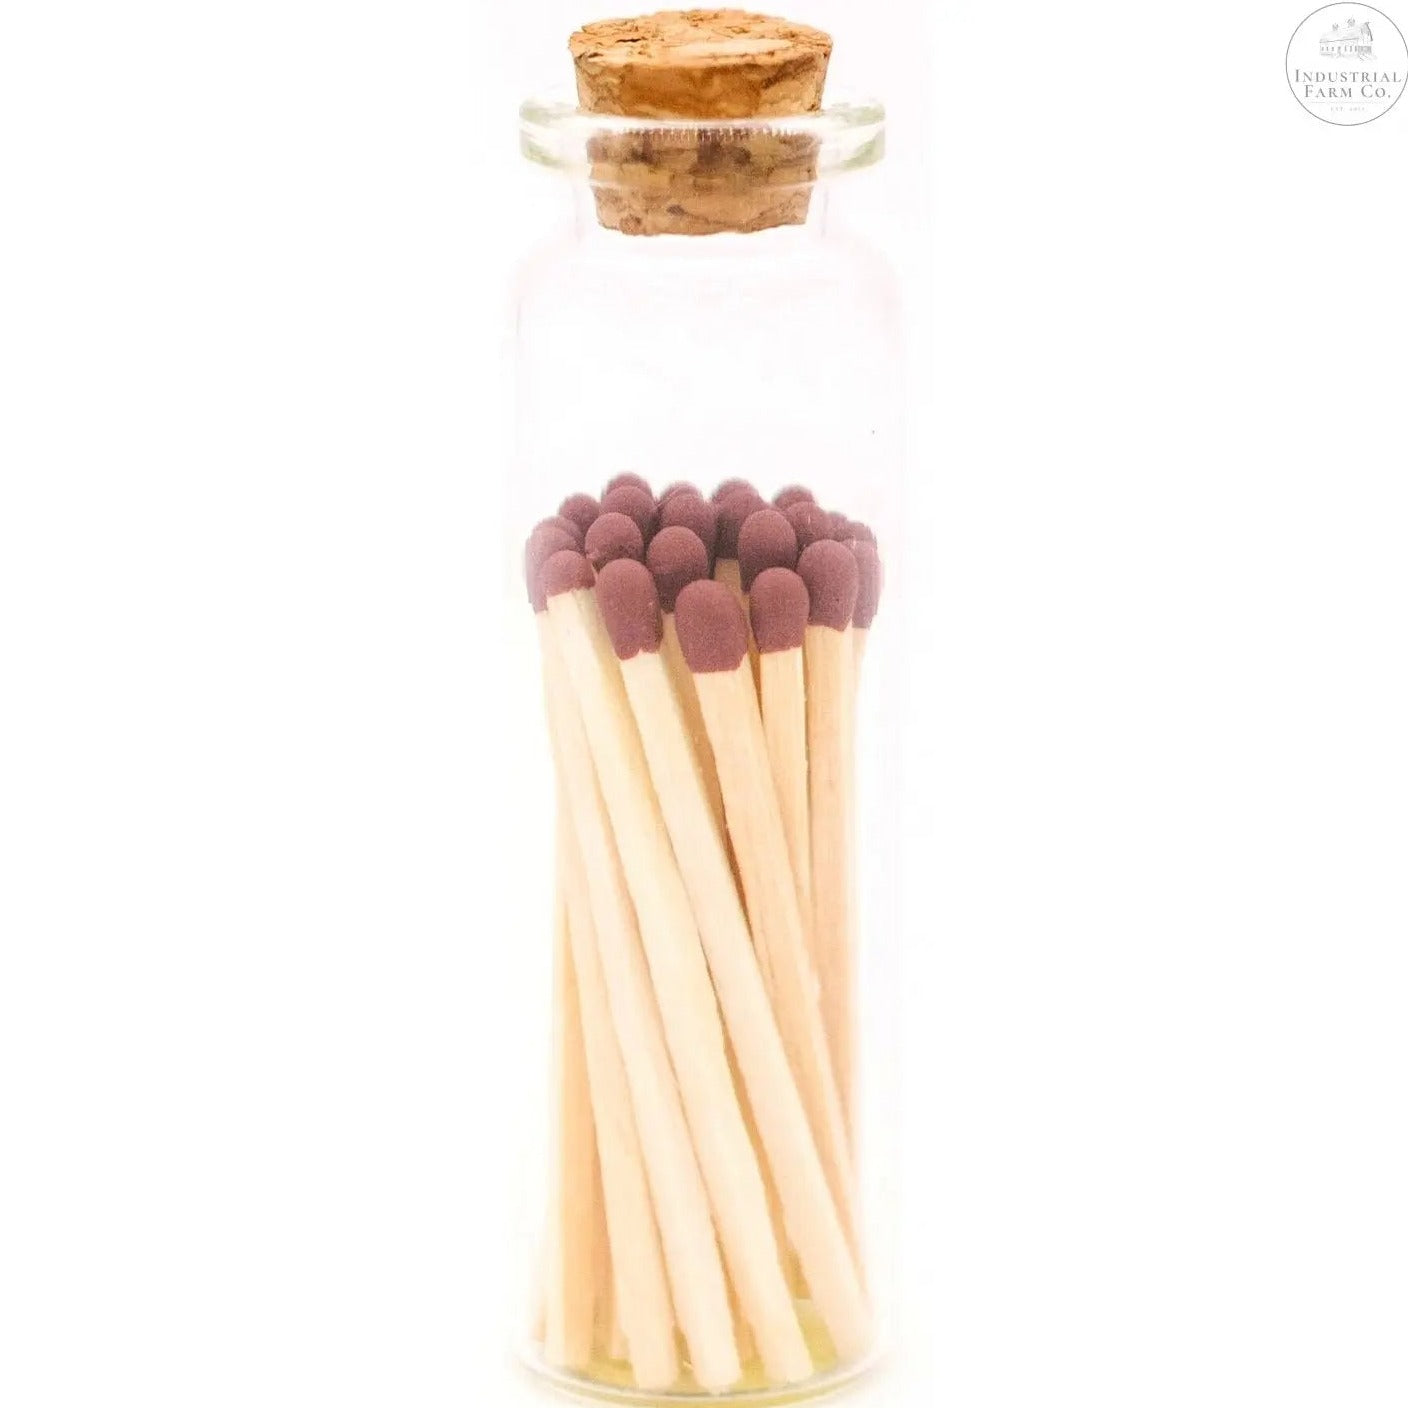 Decorative Mini Matches In Glass Container  Lilac Tip   | Industrial Farm Co